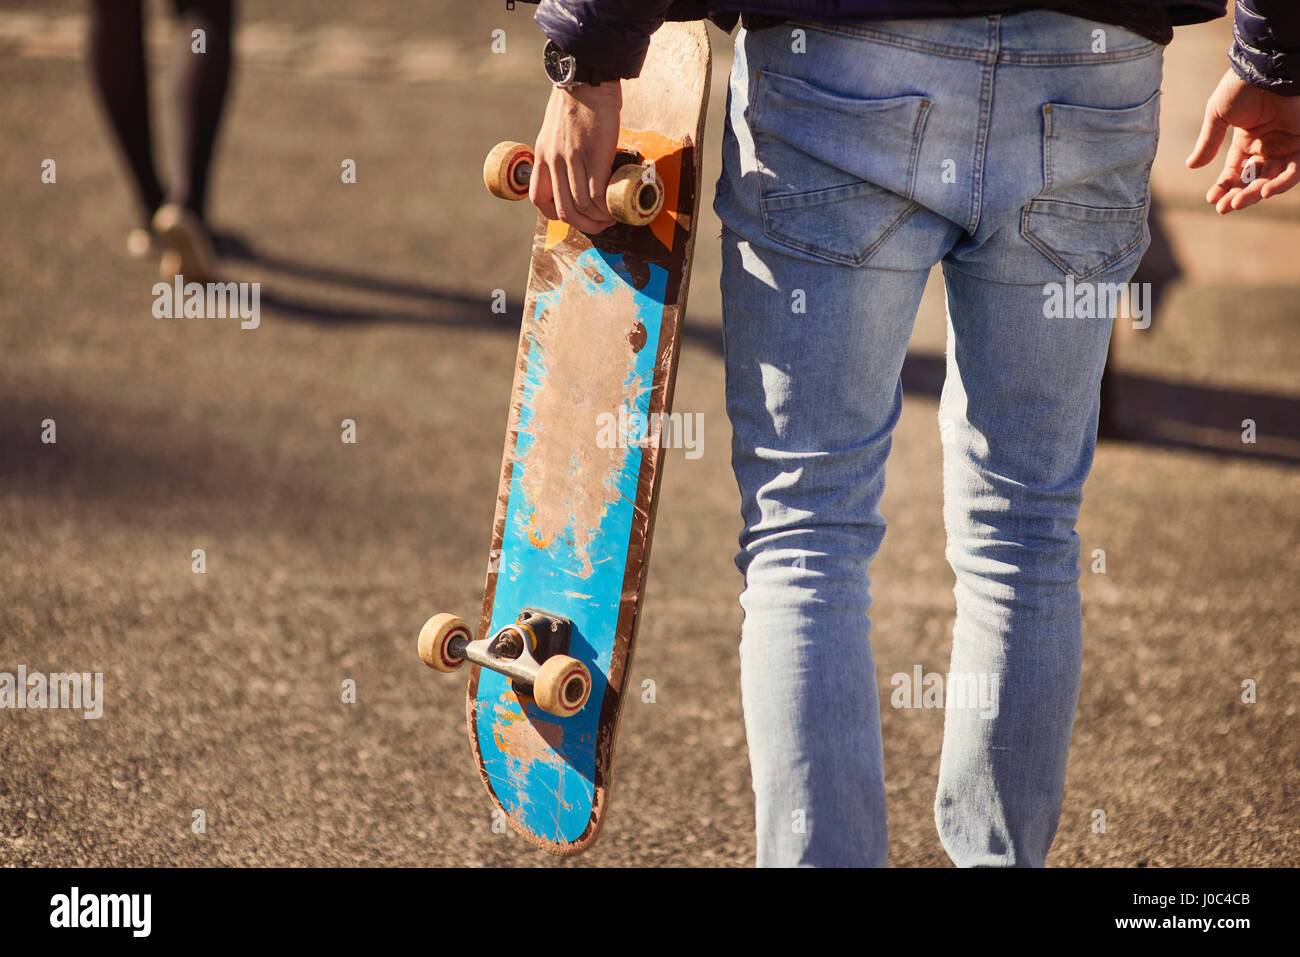 Young man walking outdoors, carrying skateboard, rear view, low section, Bristol, UK Stock Photo